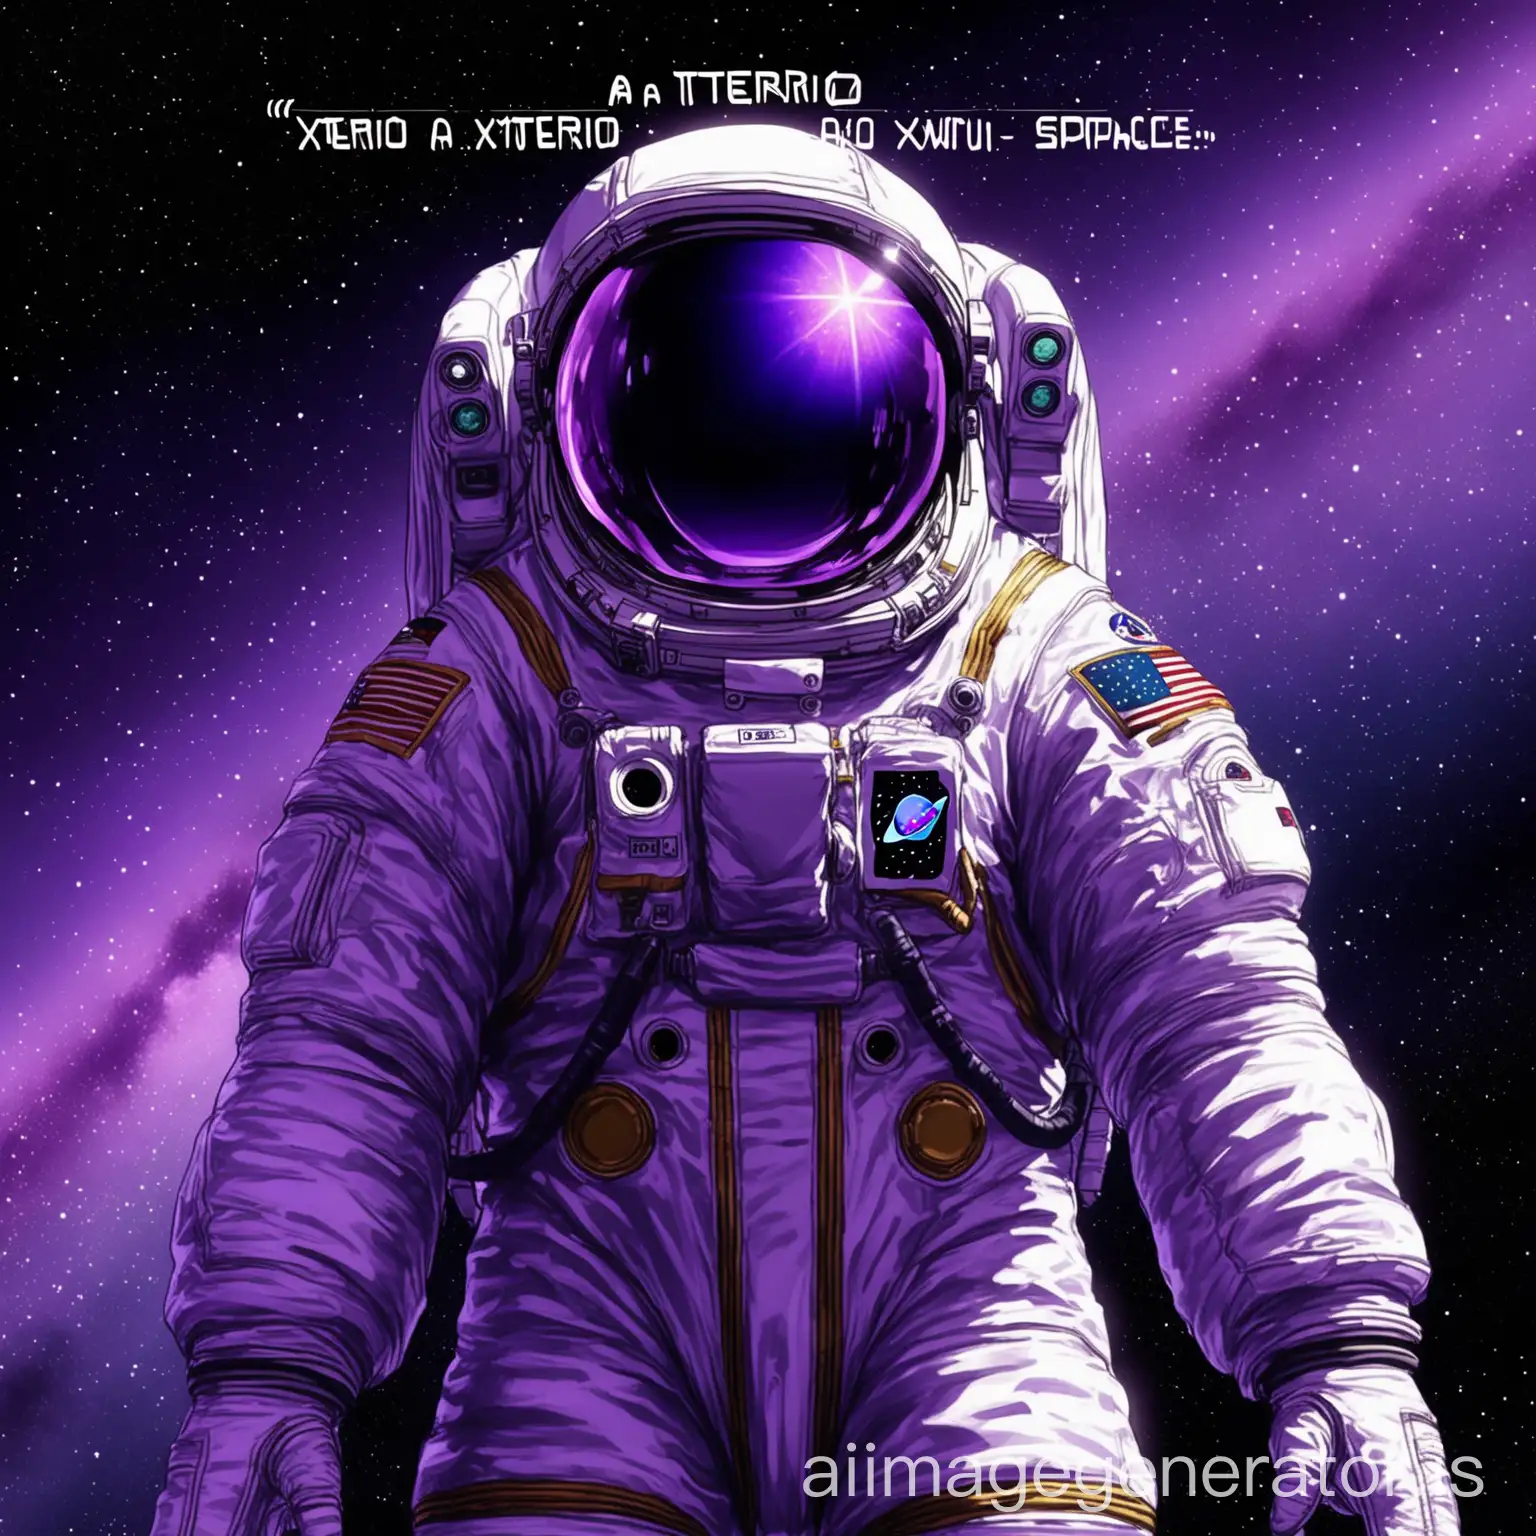 I see a purple space with stars
A "Xterio" text in background
Also men with Spacesuit
Details are very high quality